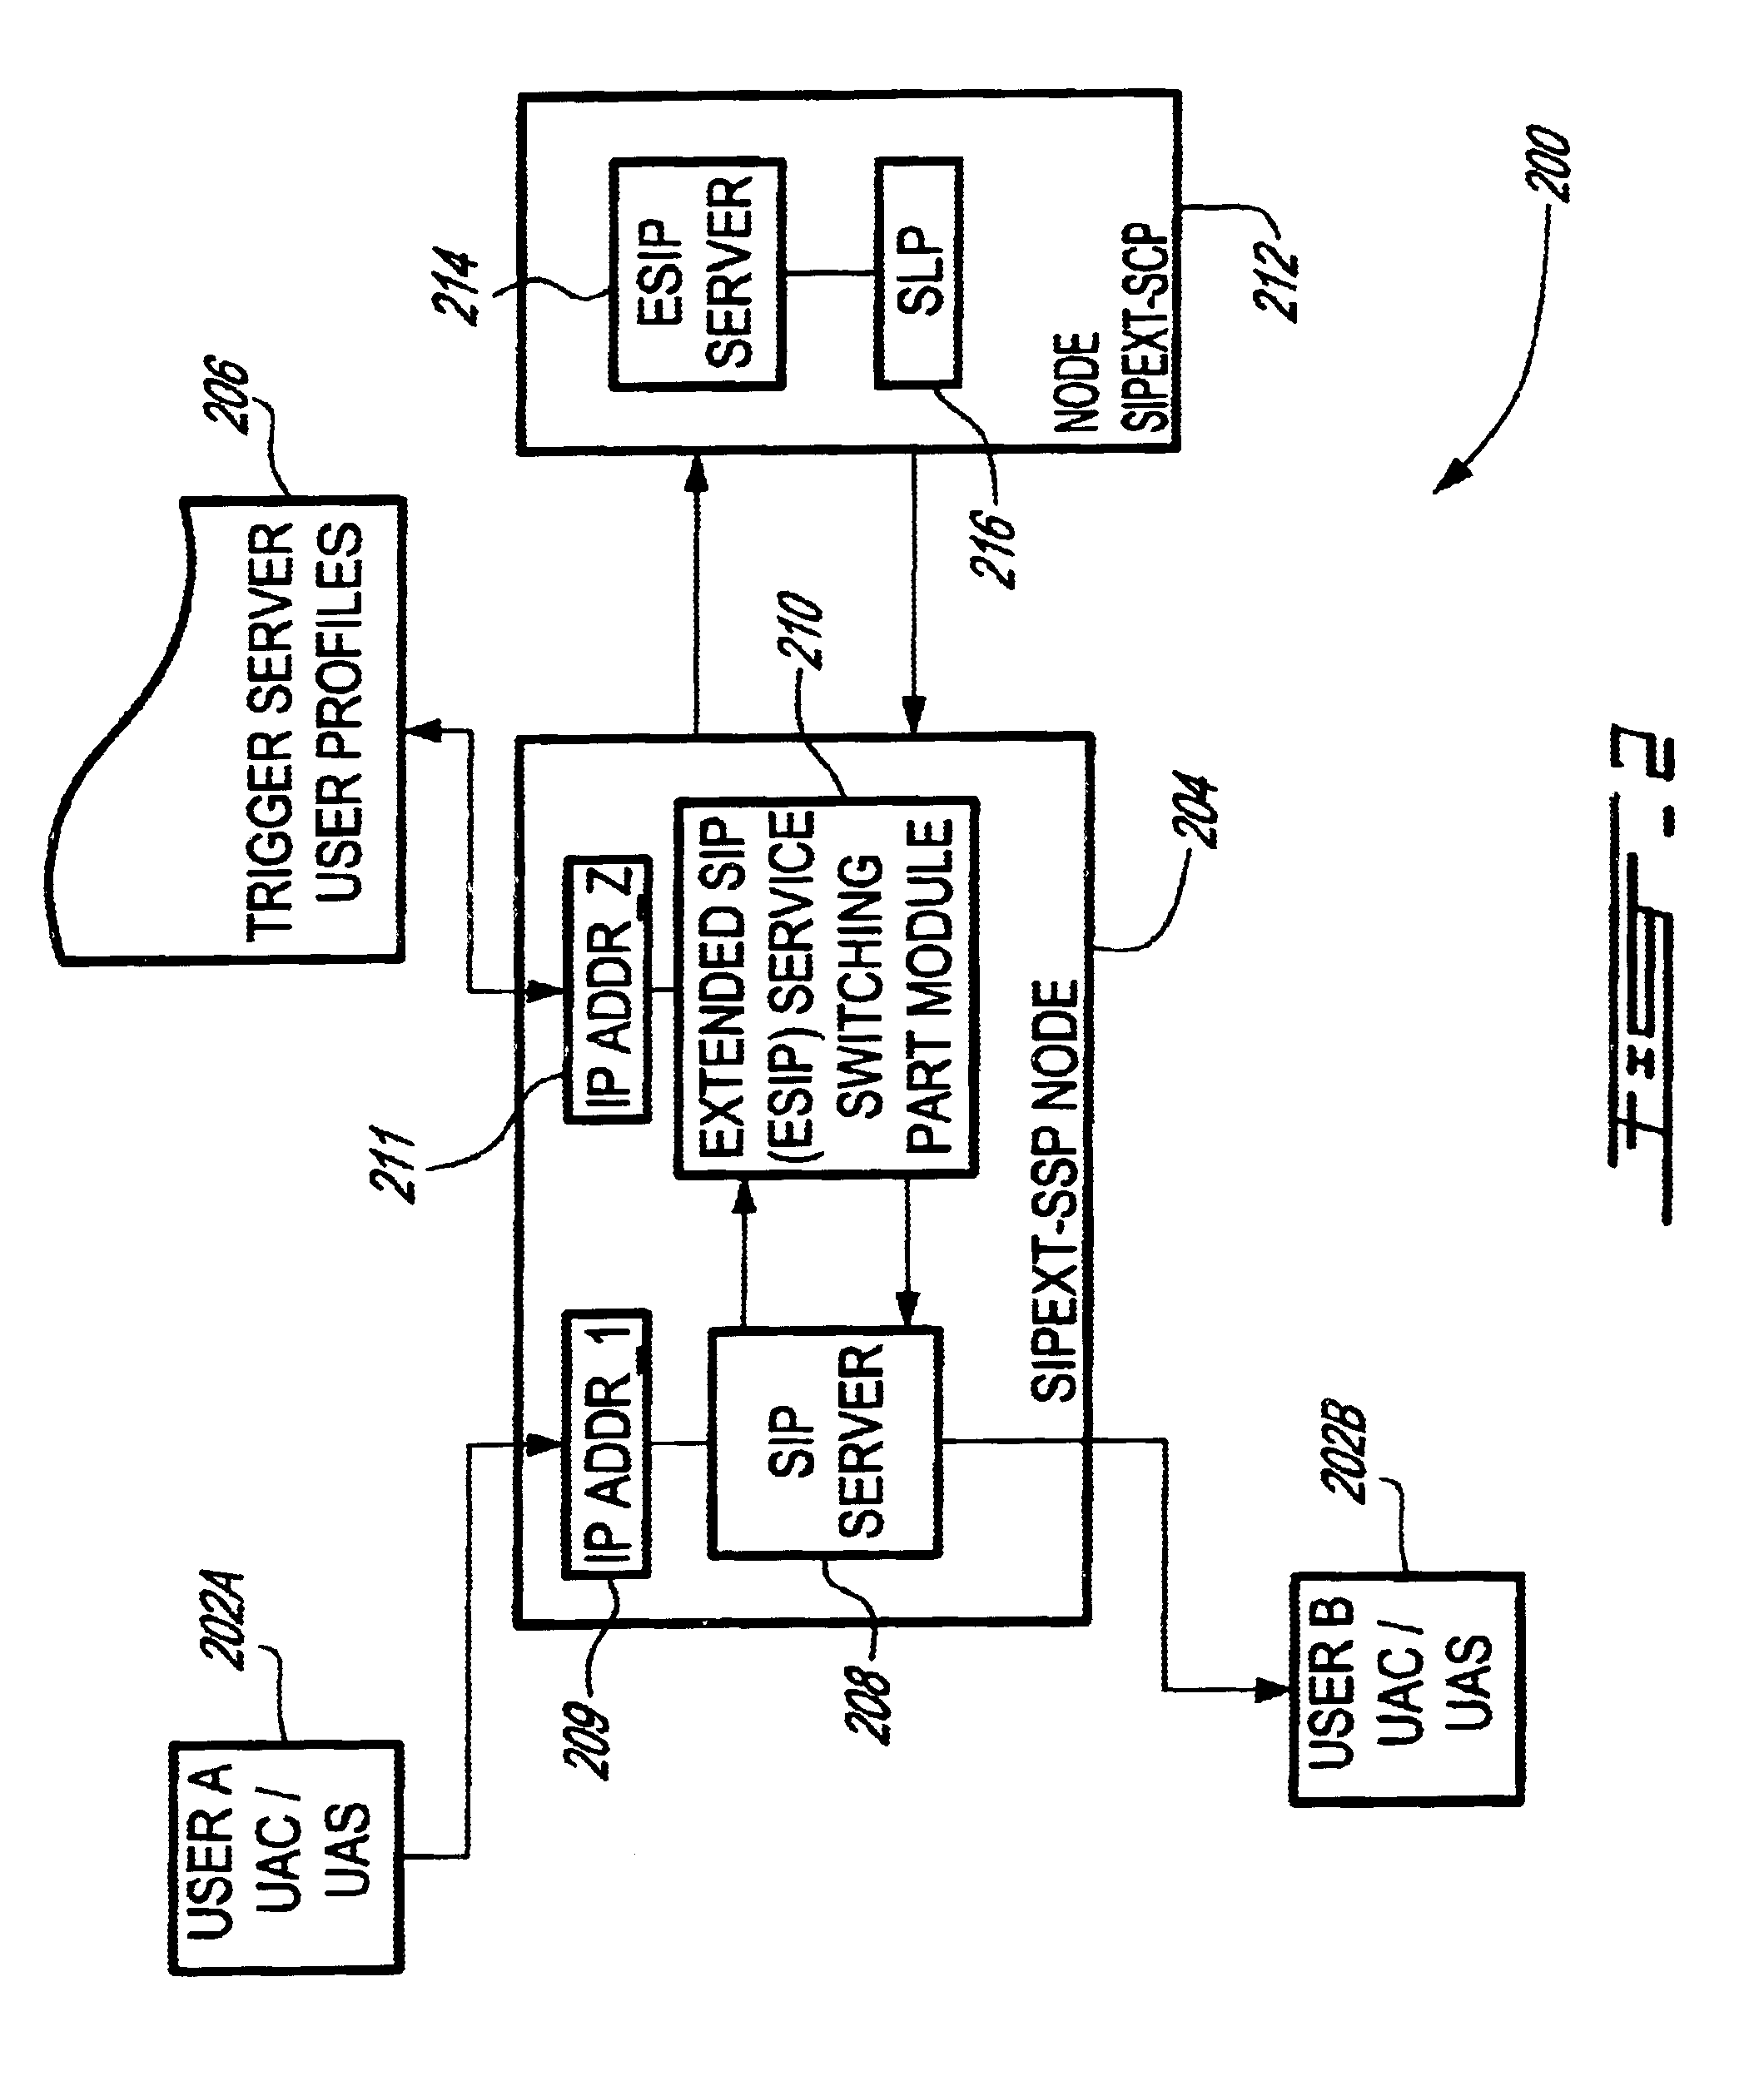 System and method for providing value-added services (VAS) in an integrated telecommunications network using session initiation protocol (SIP)